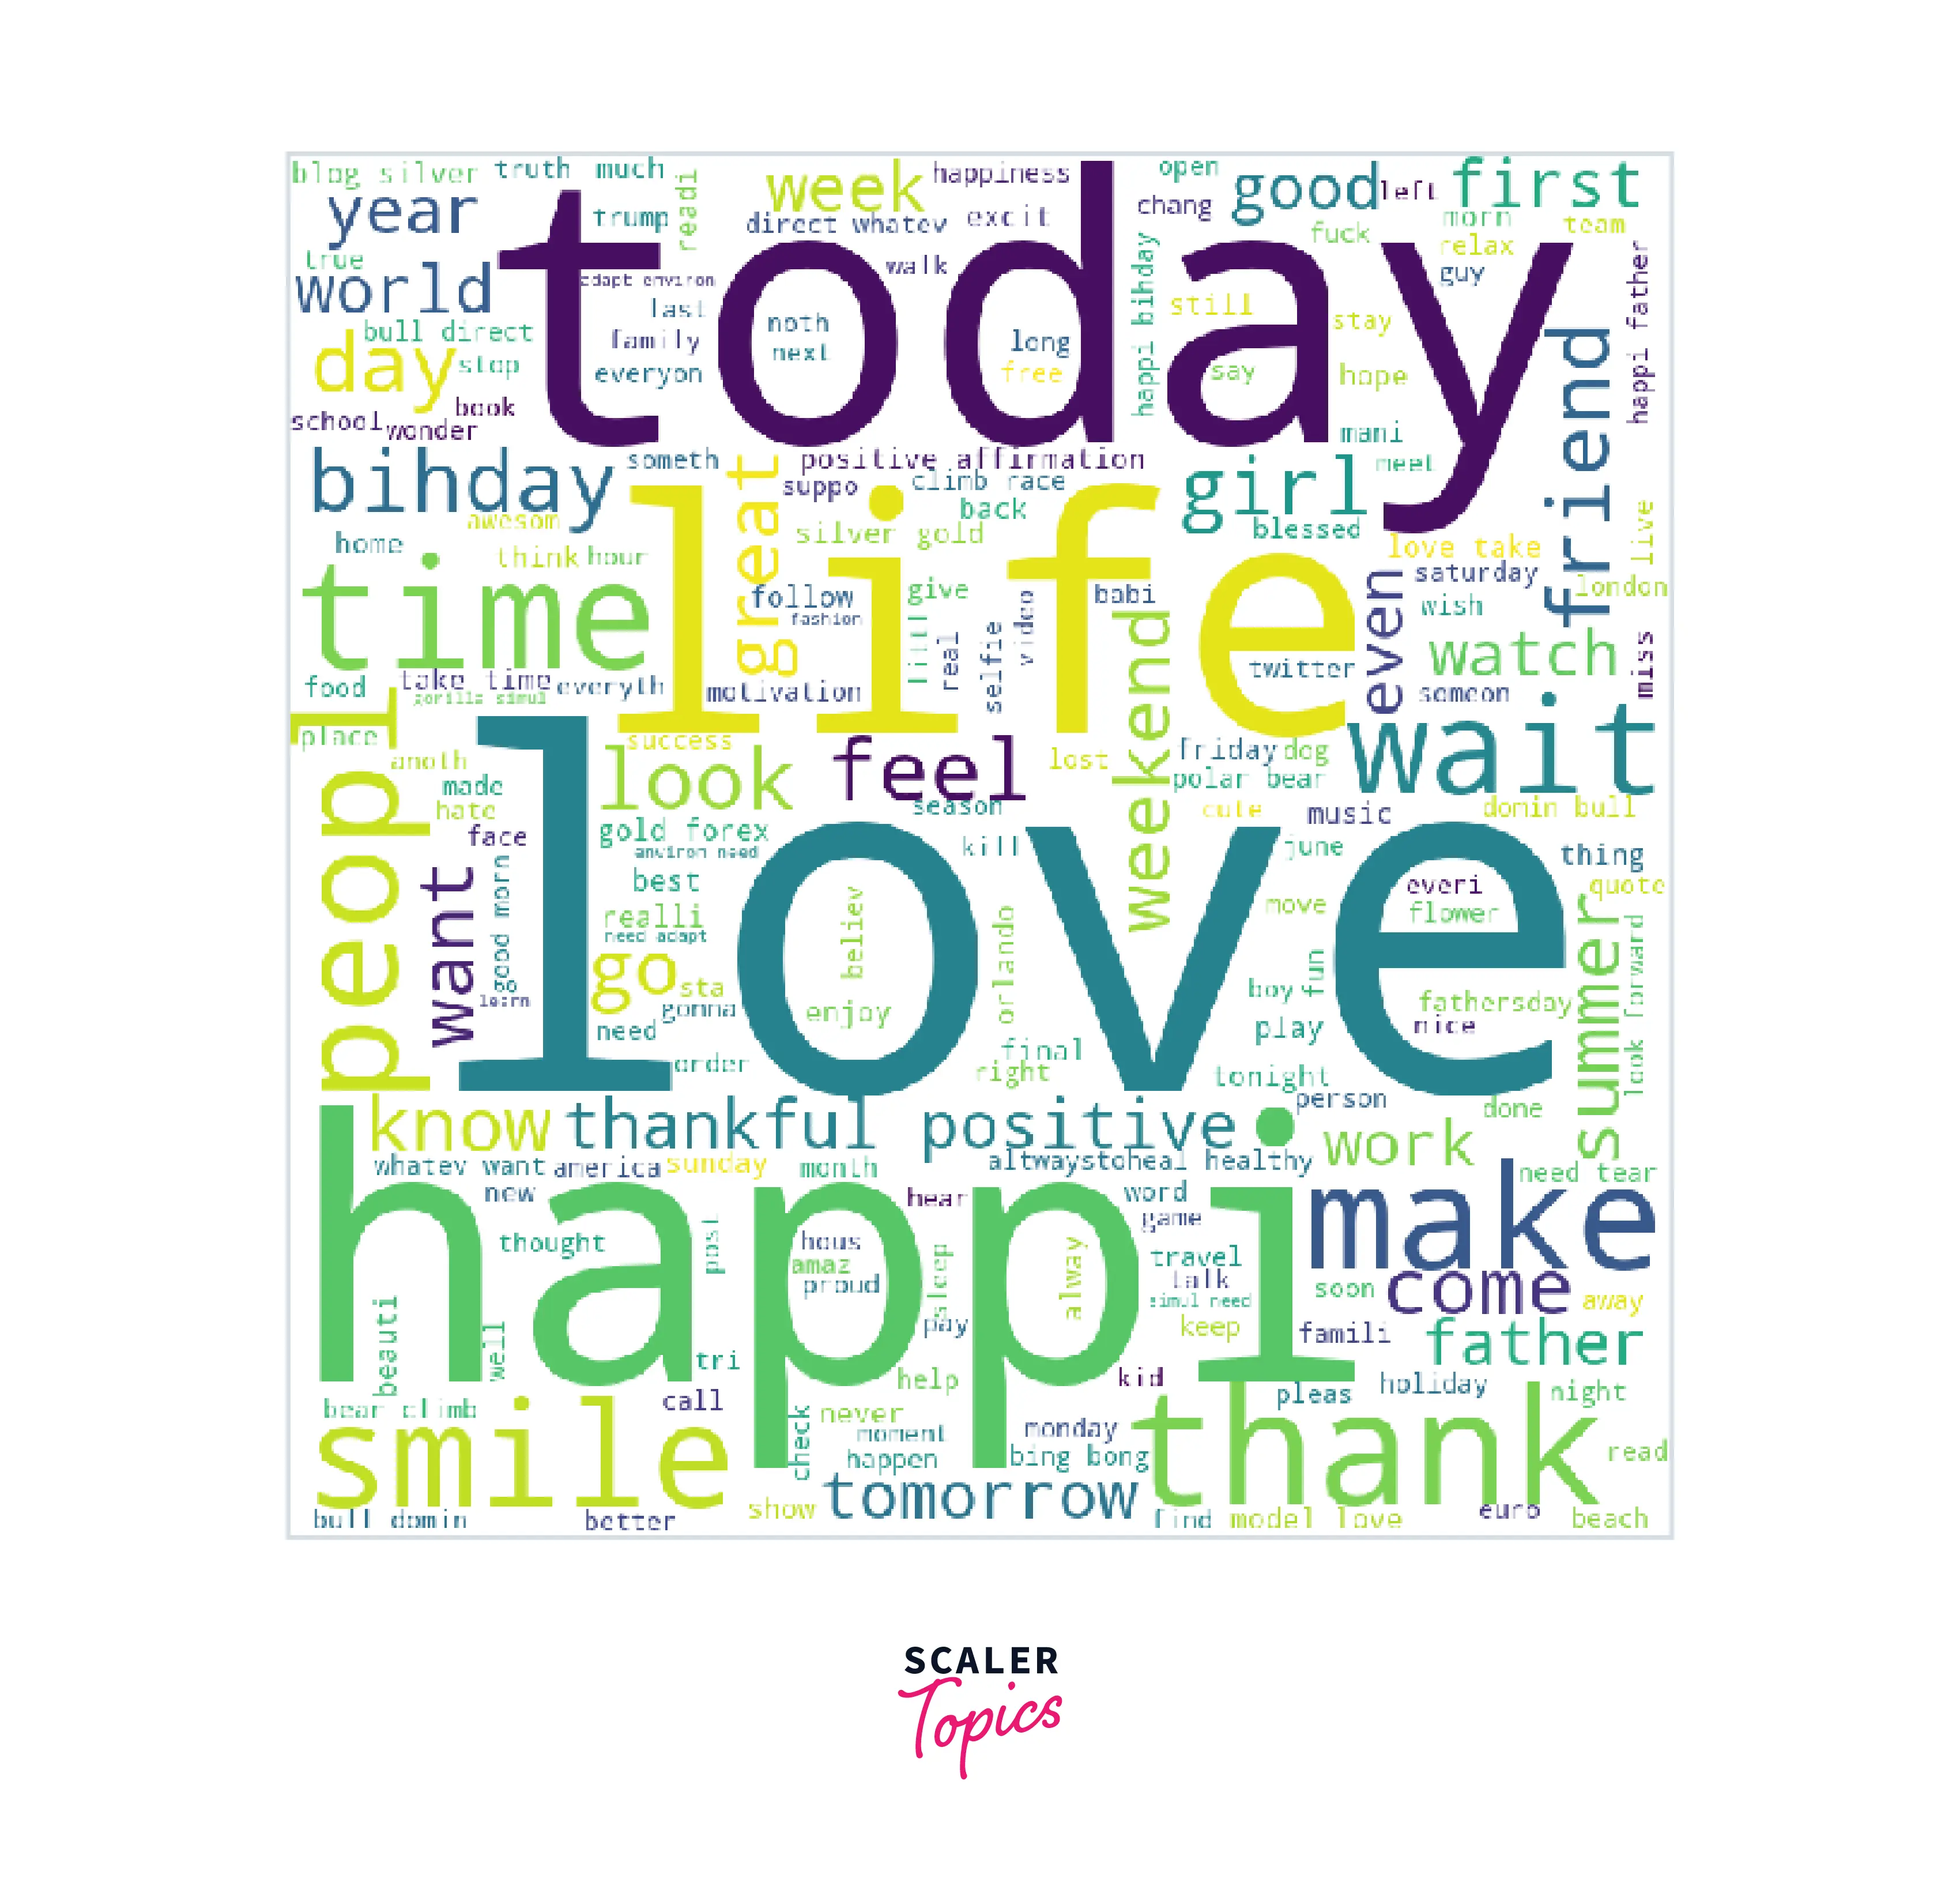 wordcloud of tweets with positive emotions